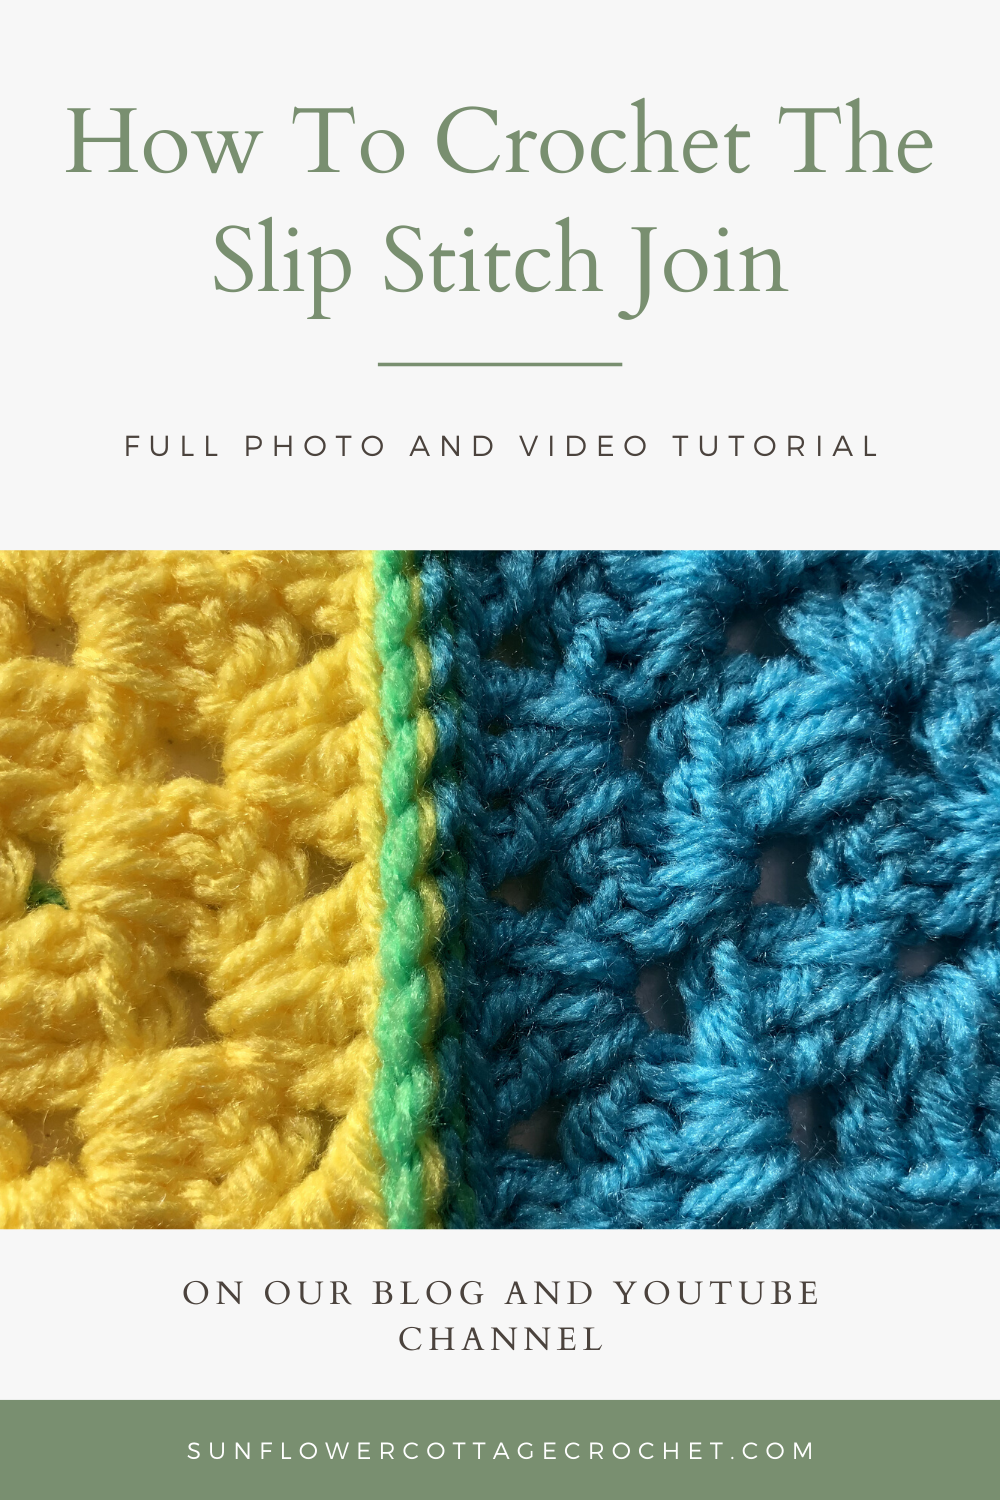 How To Crochet The Slip Stitch Join